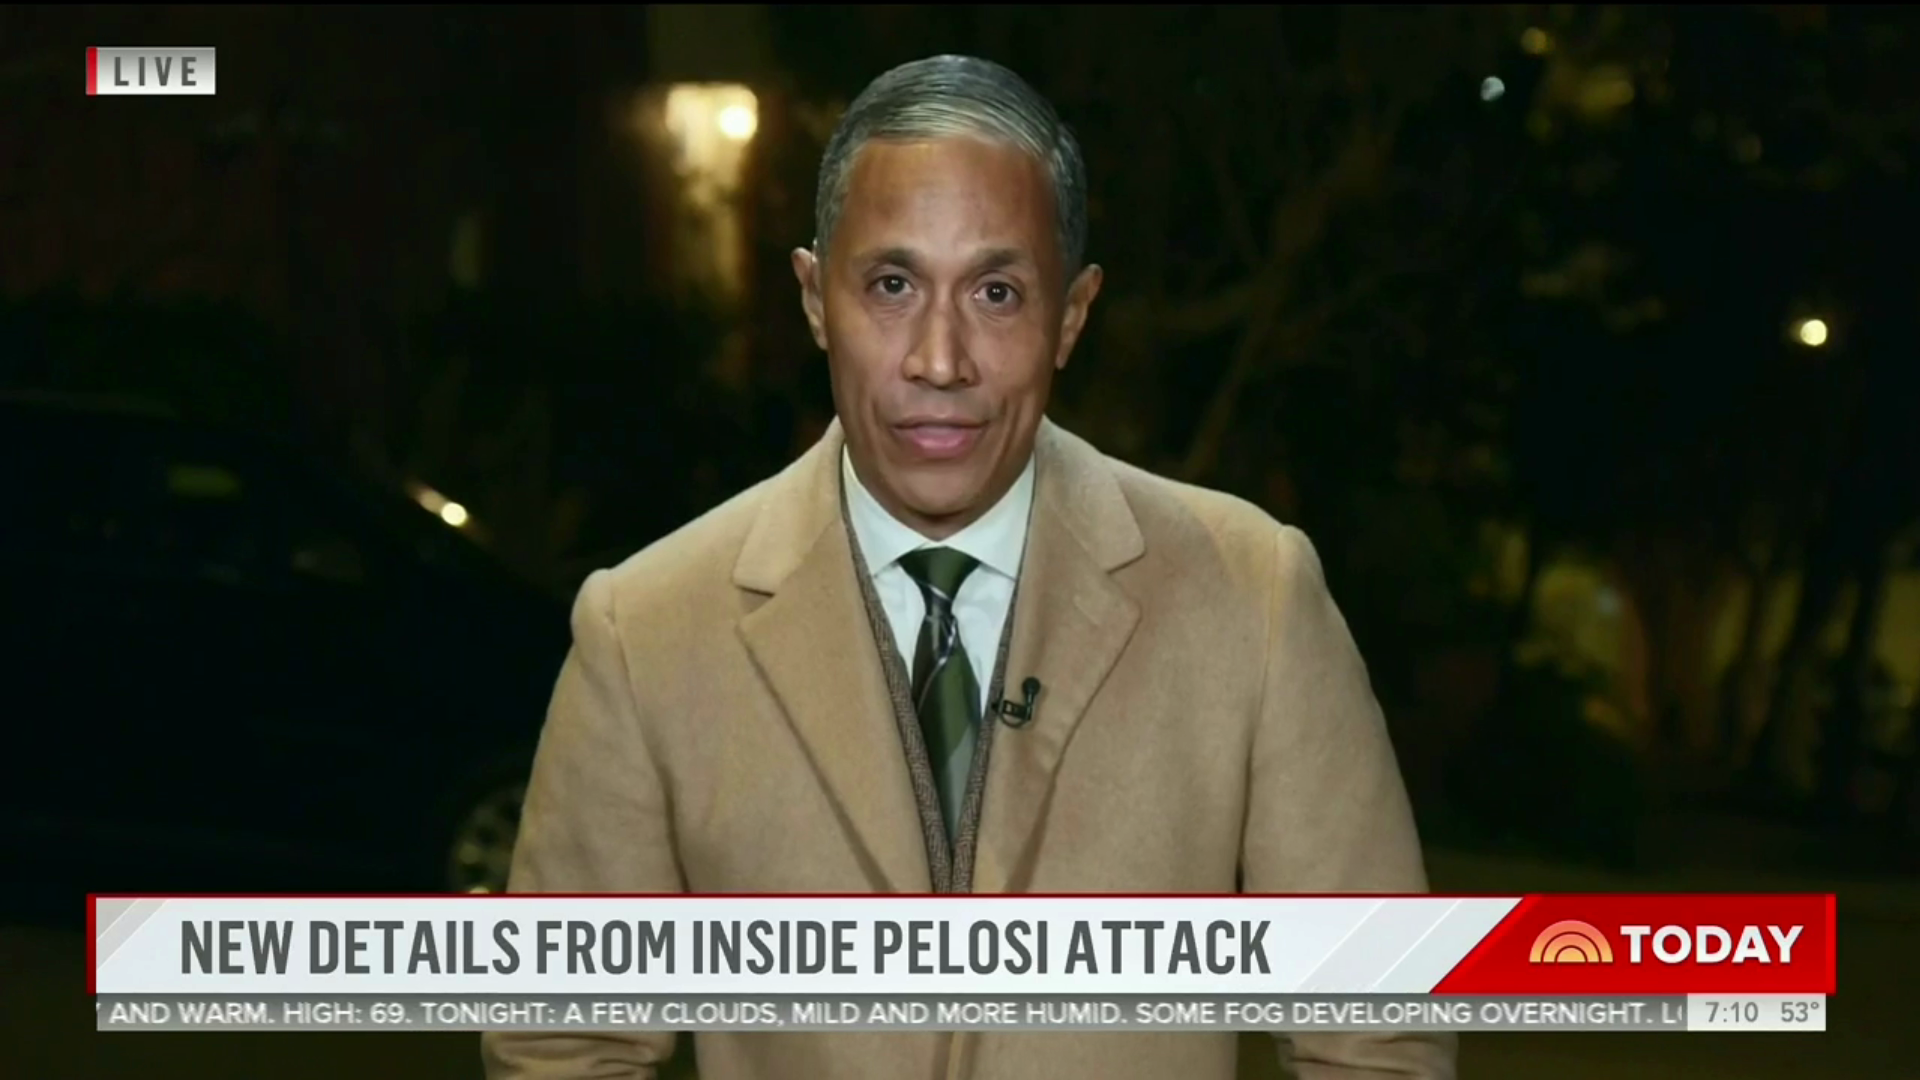 NBC DELETES Report on Pelosi Attack From Website Over 'Reporting Stanards' — WATCH Segment Here